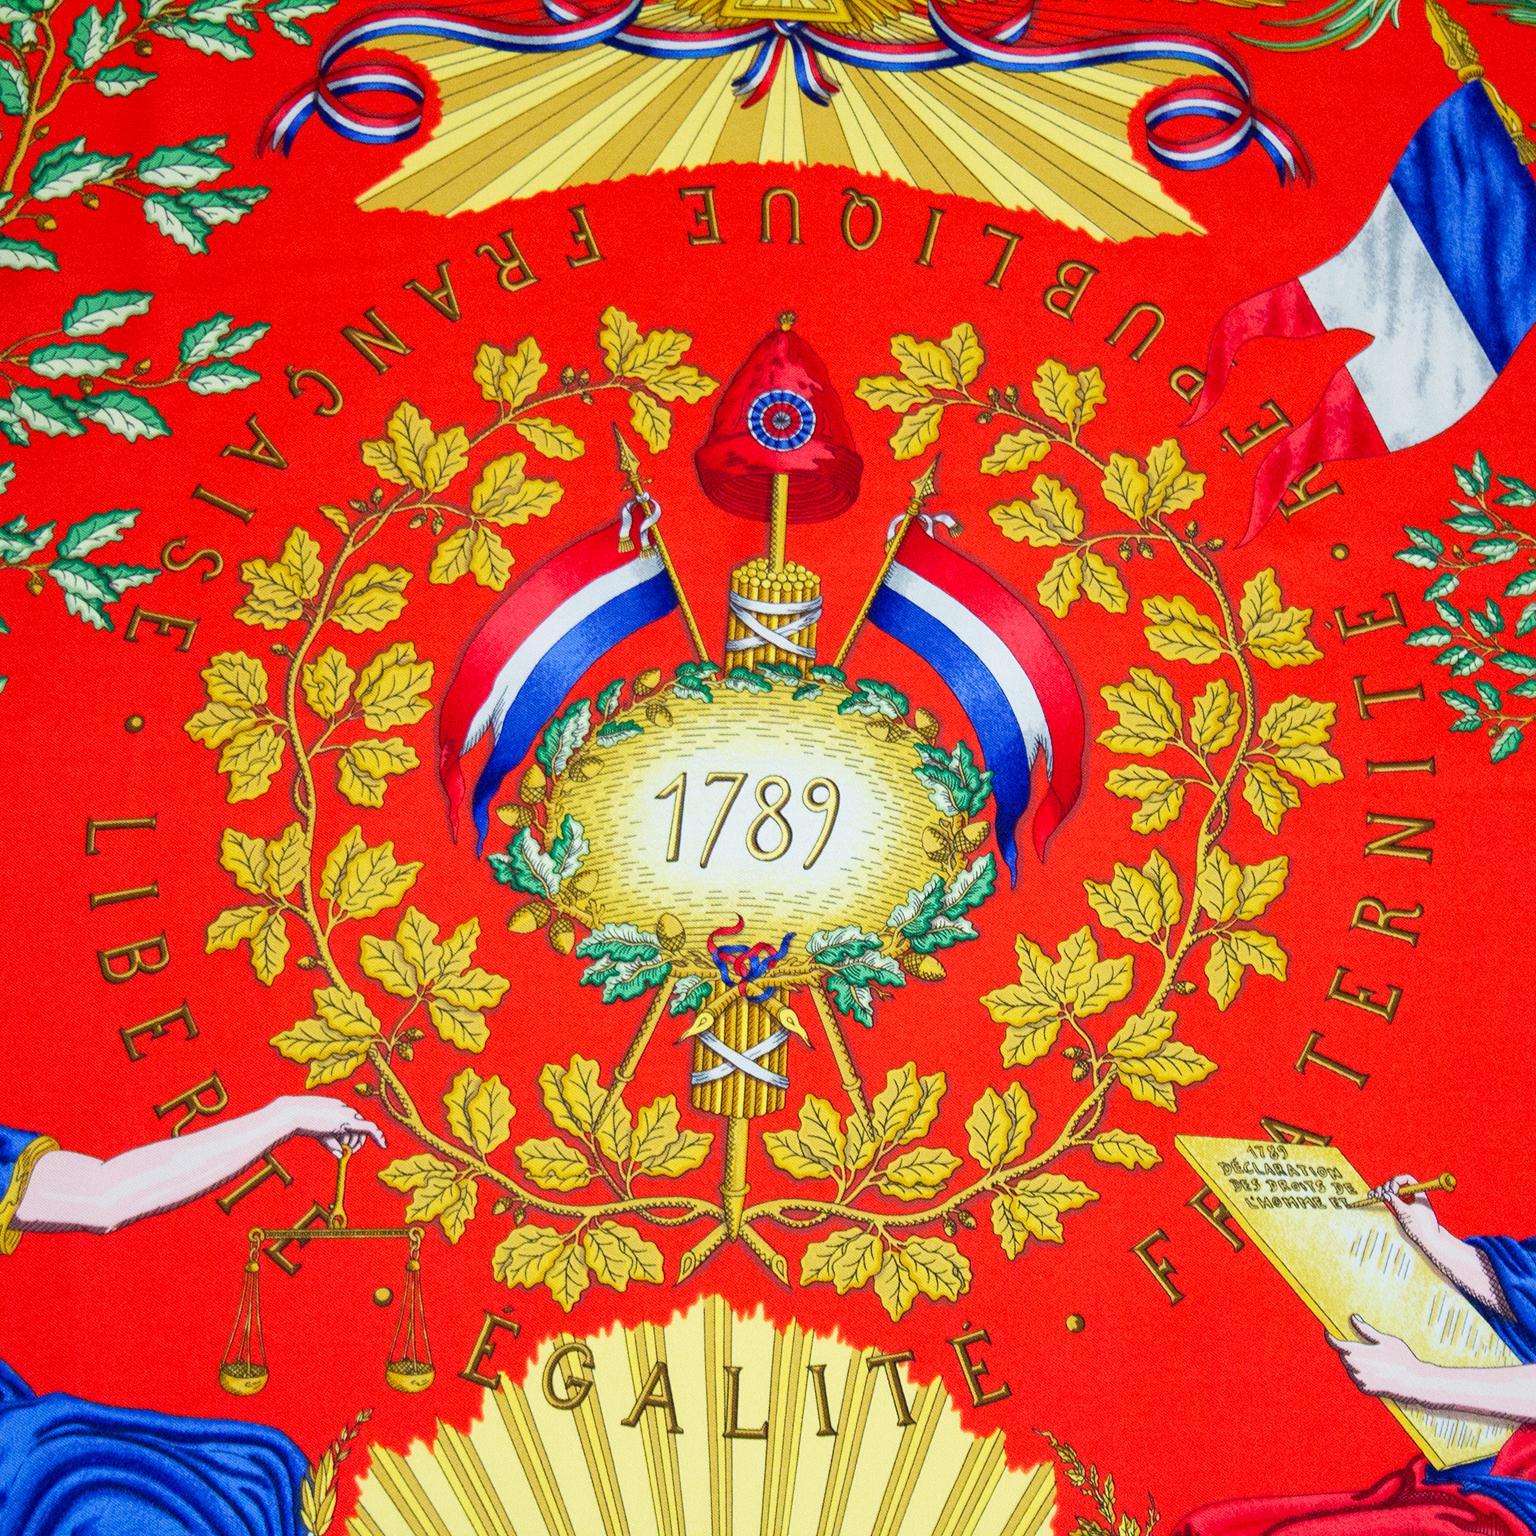 Hermes 'Republique Francaise Liberte Egalite Fraternite' silk scarf. This dramatic scarf was first issued in 1989 at the 200-year anniversary of France as a republic. This design is by Joachim Metz, and celebrates France becoming a Republic. Bold